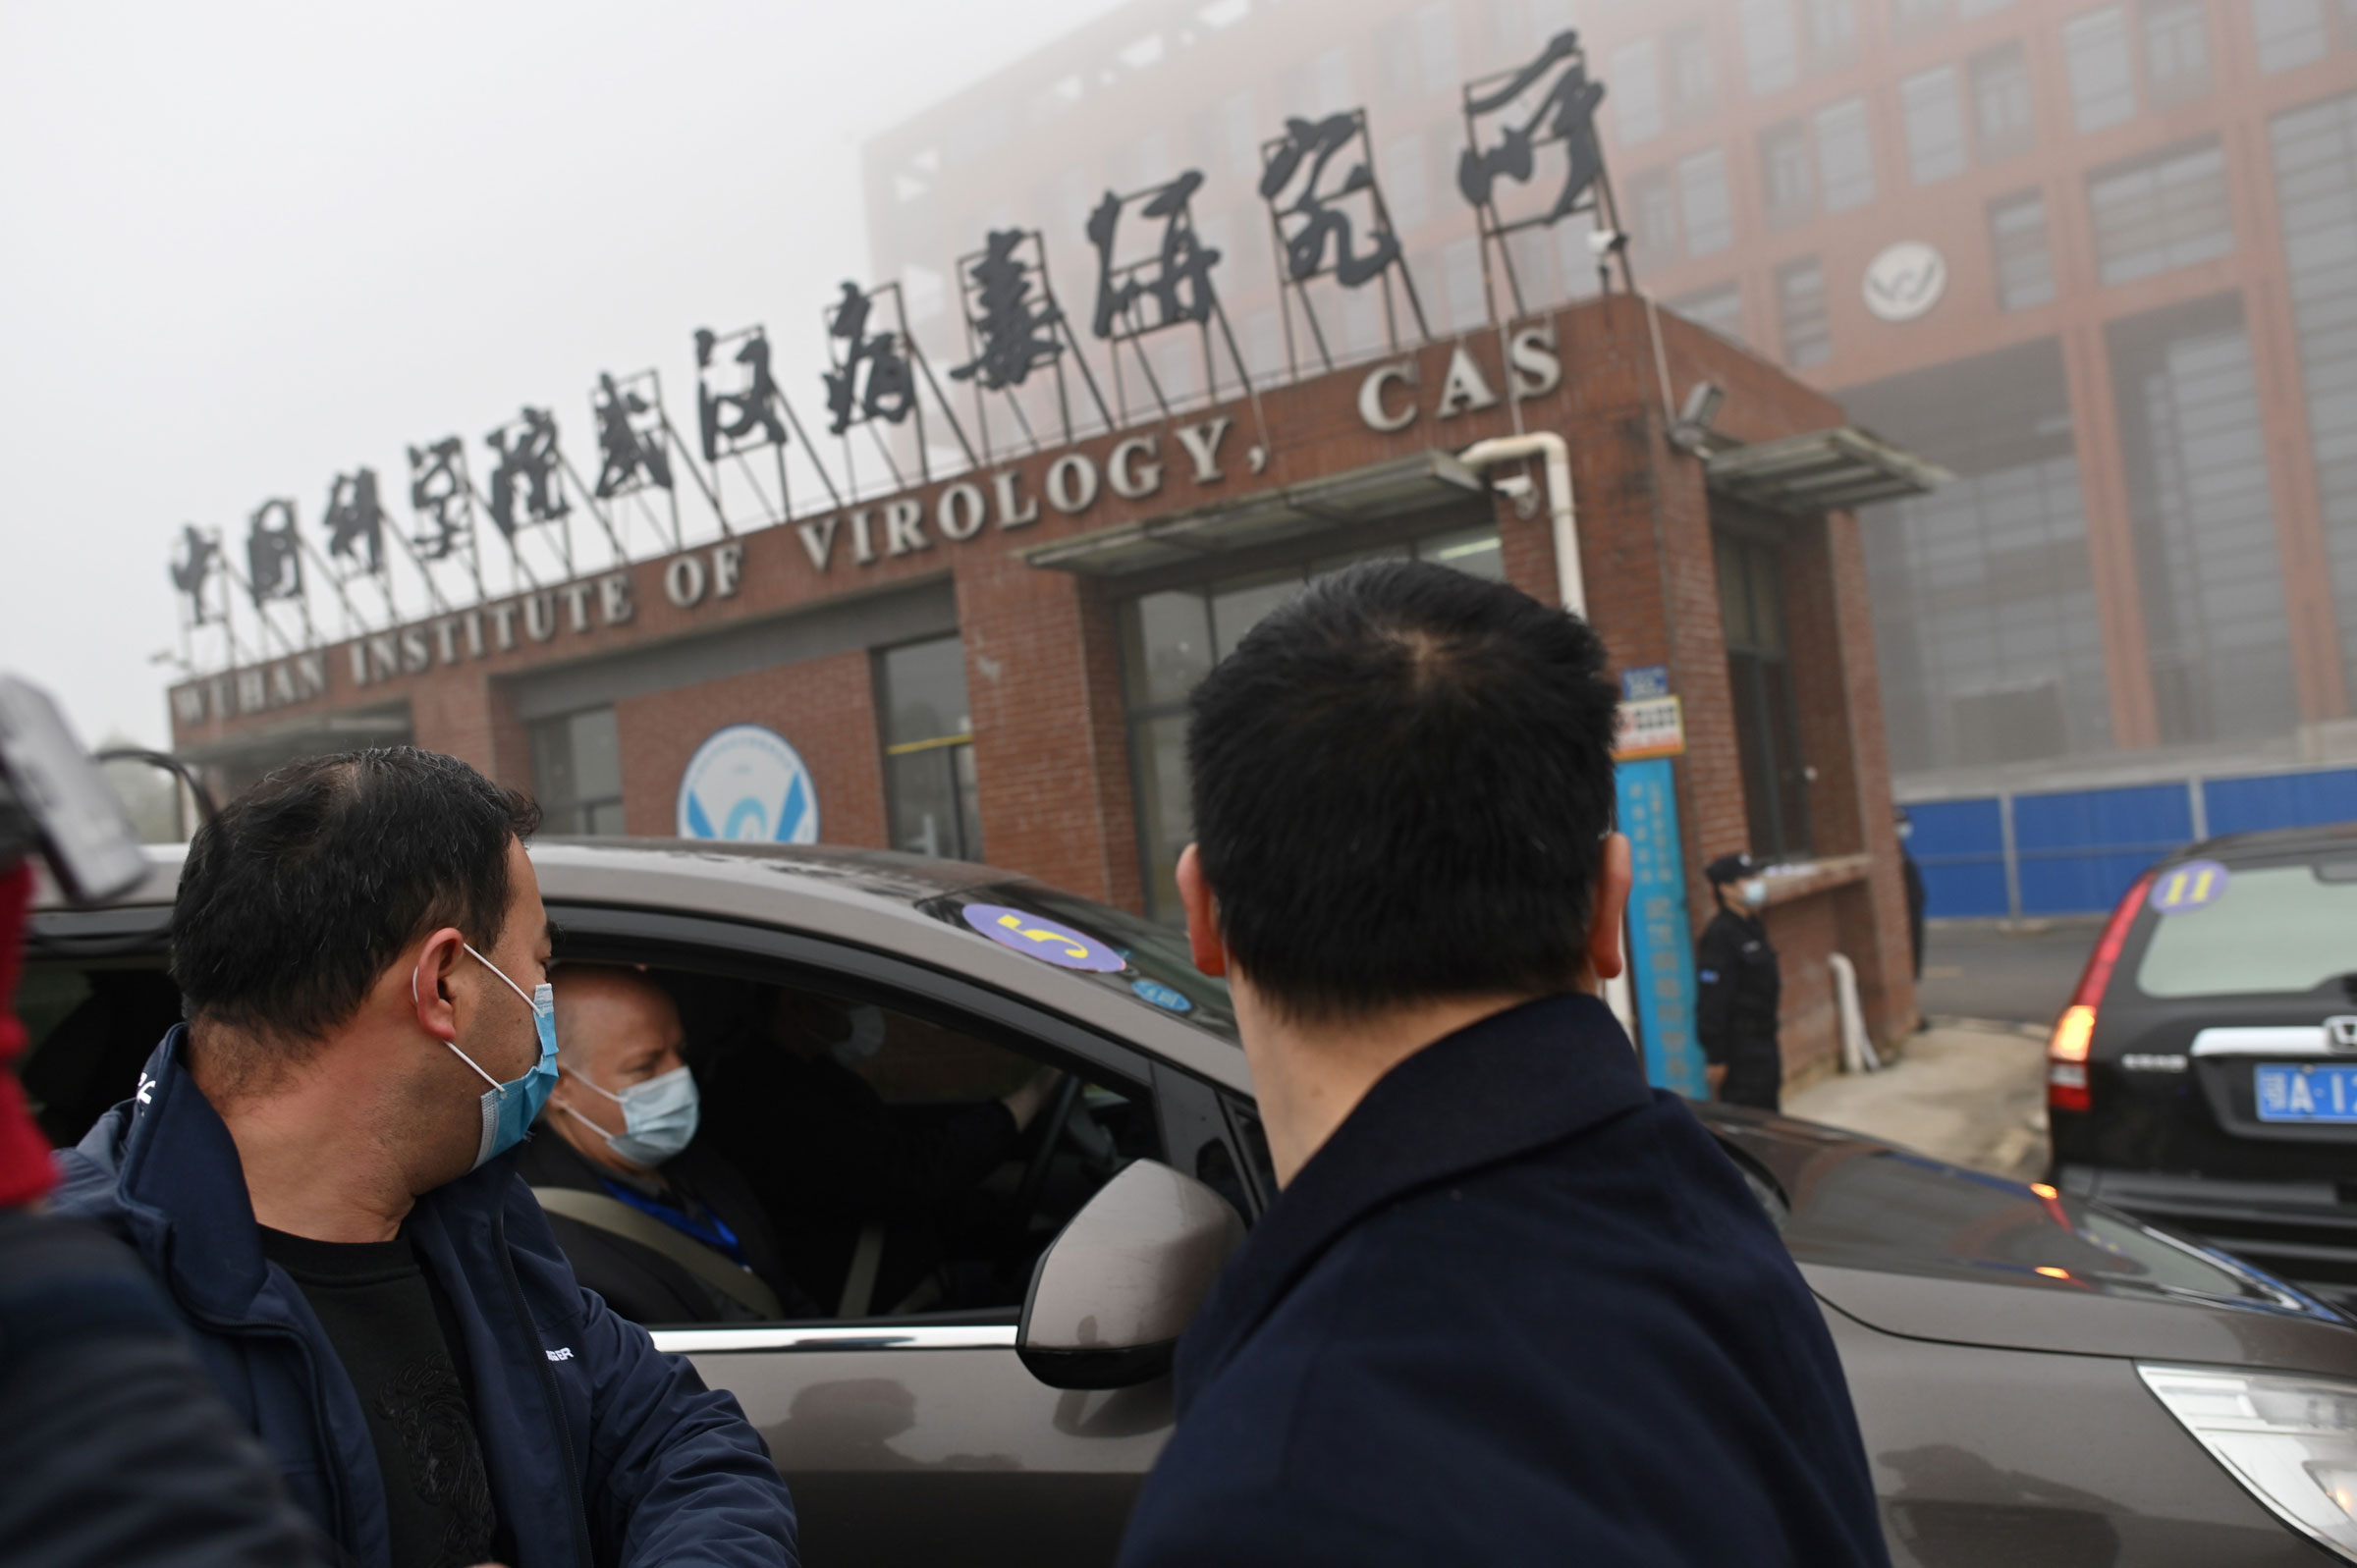 Members of the World Health Organization team investigating the origins of COVID-19 arrive by car at the Wuhan Institute of Virology